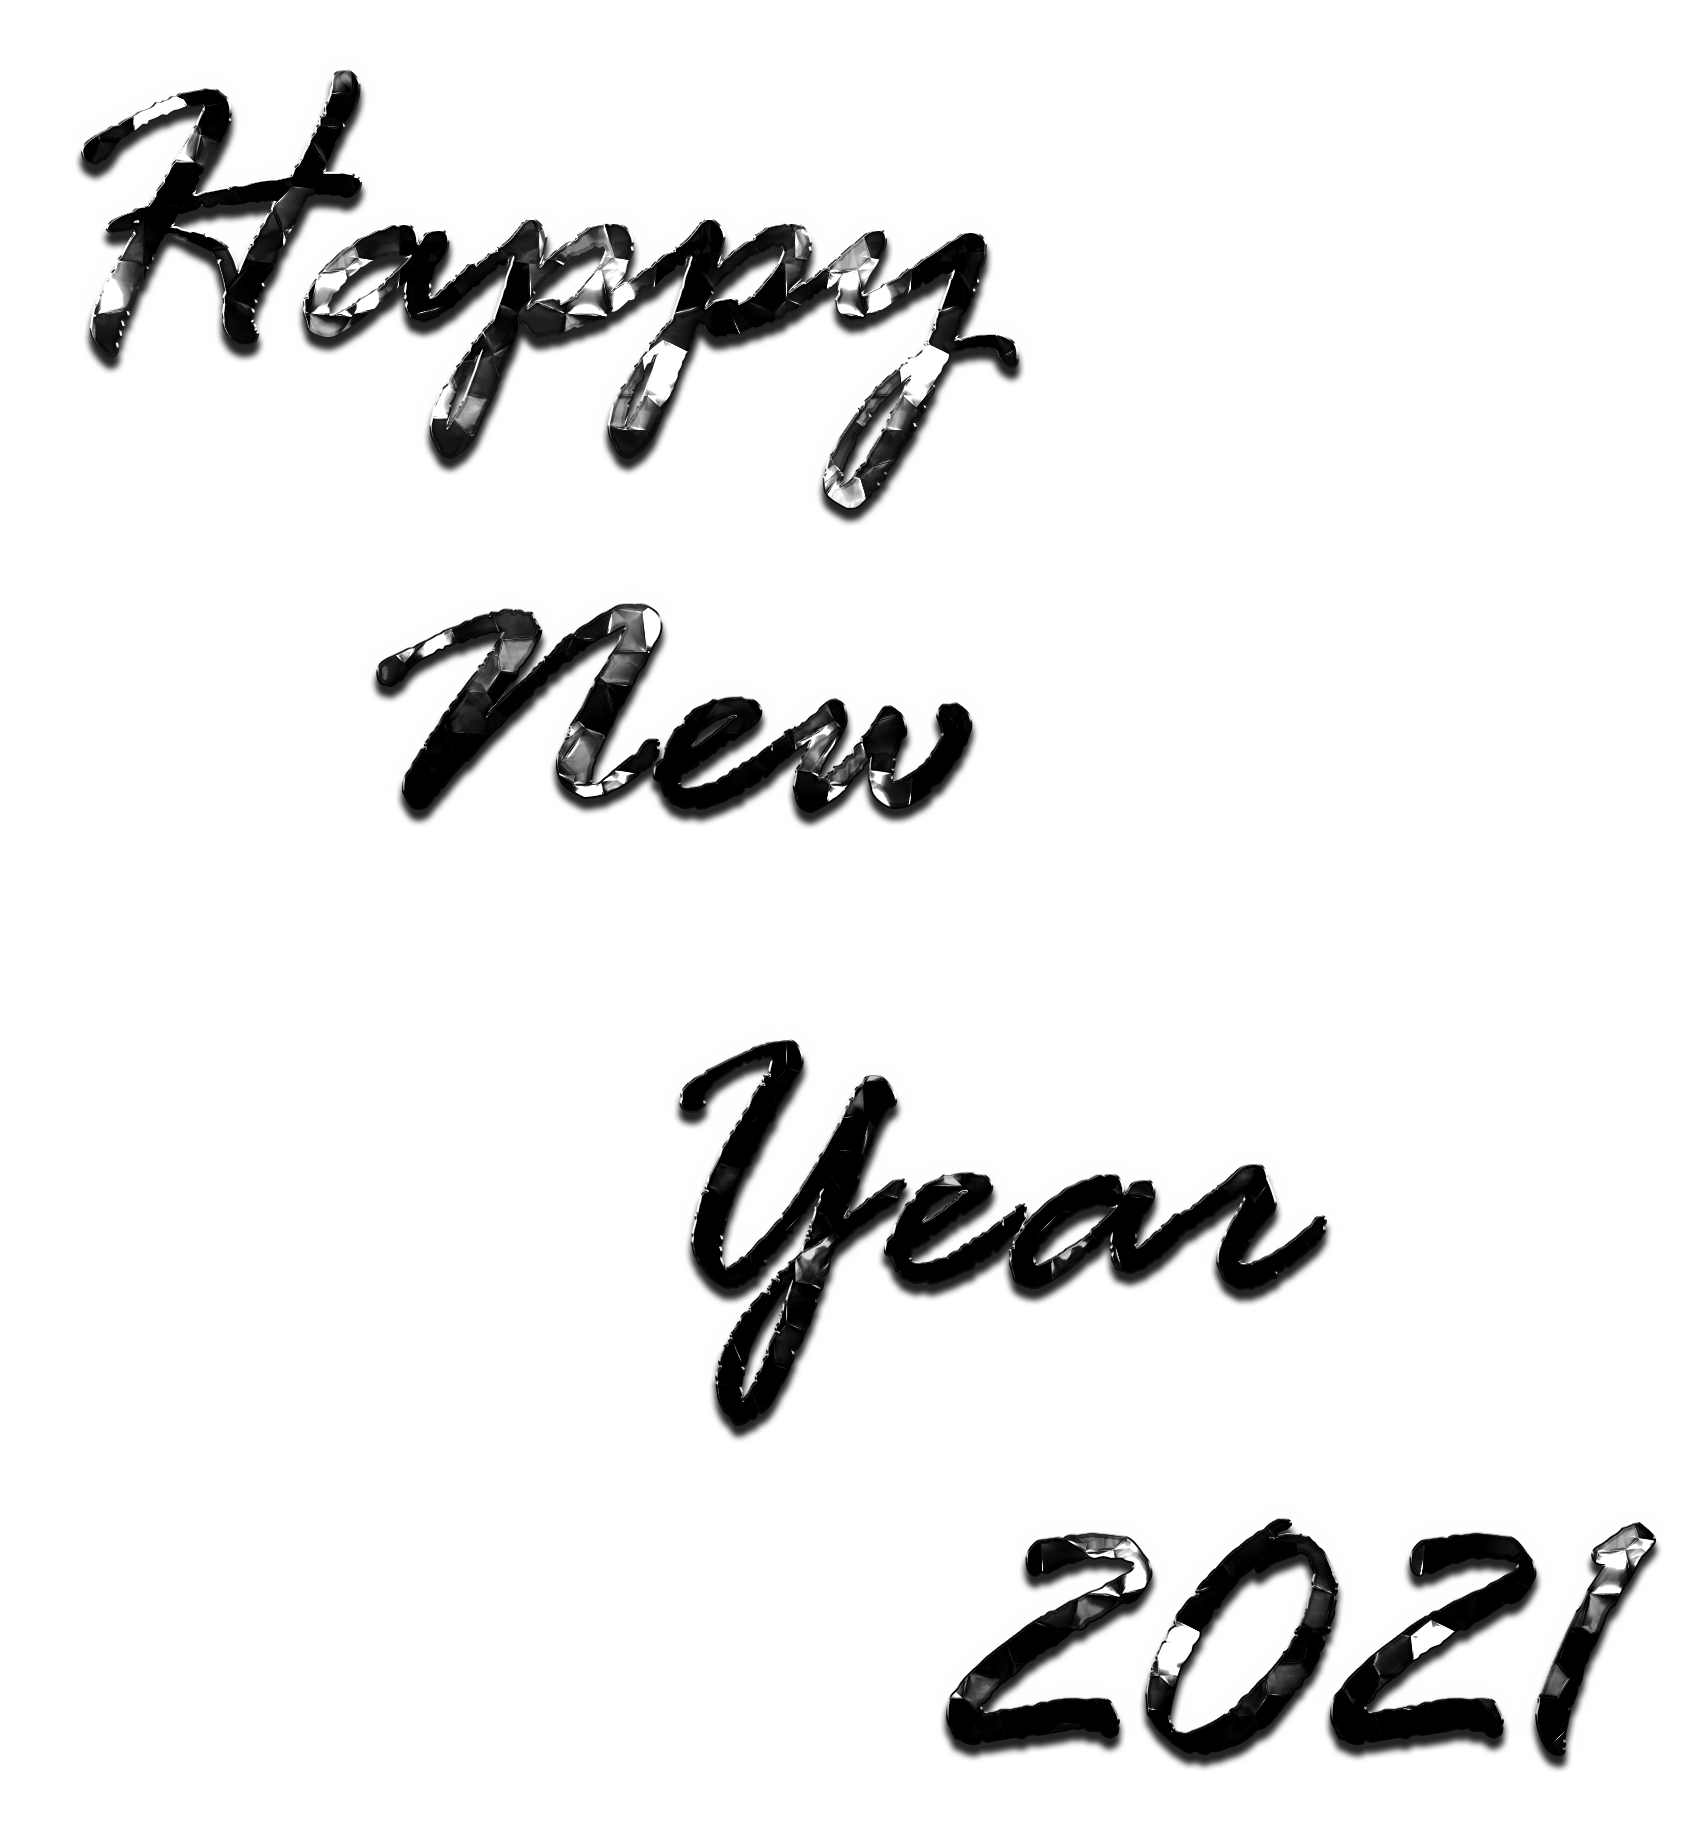 Happy New Year 2021 PNG High-Quality Image